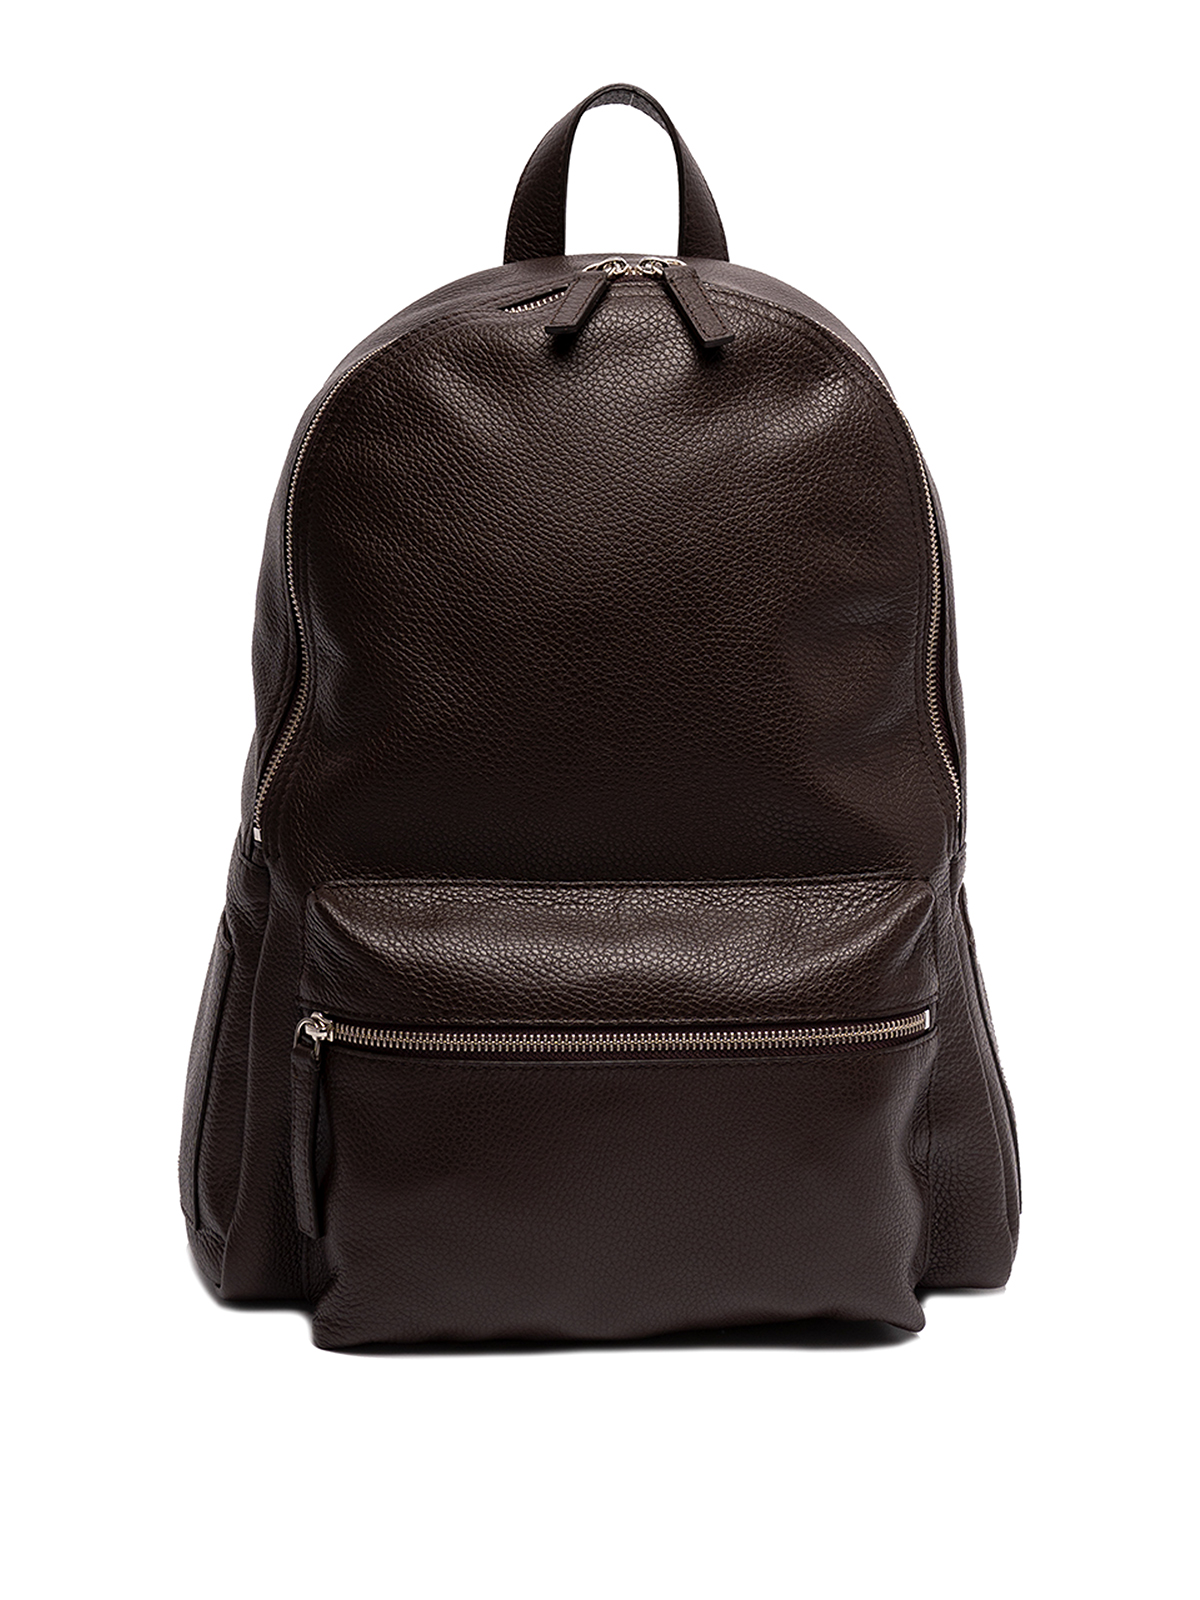 ORCIANI `MICRON` LEATHER BACKPACK